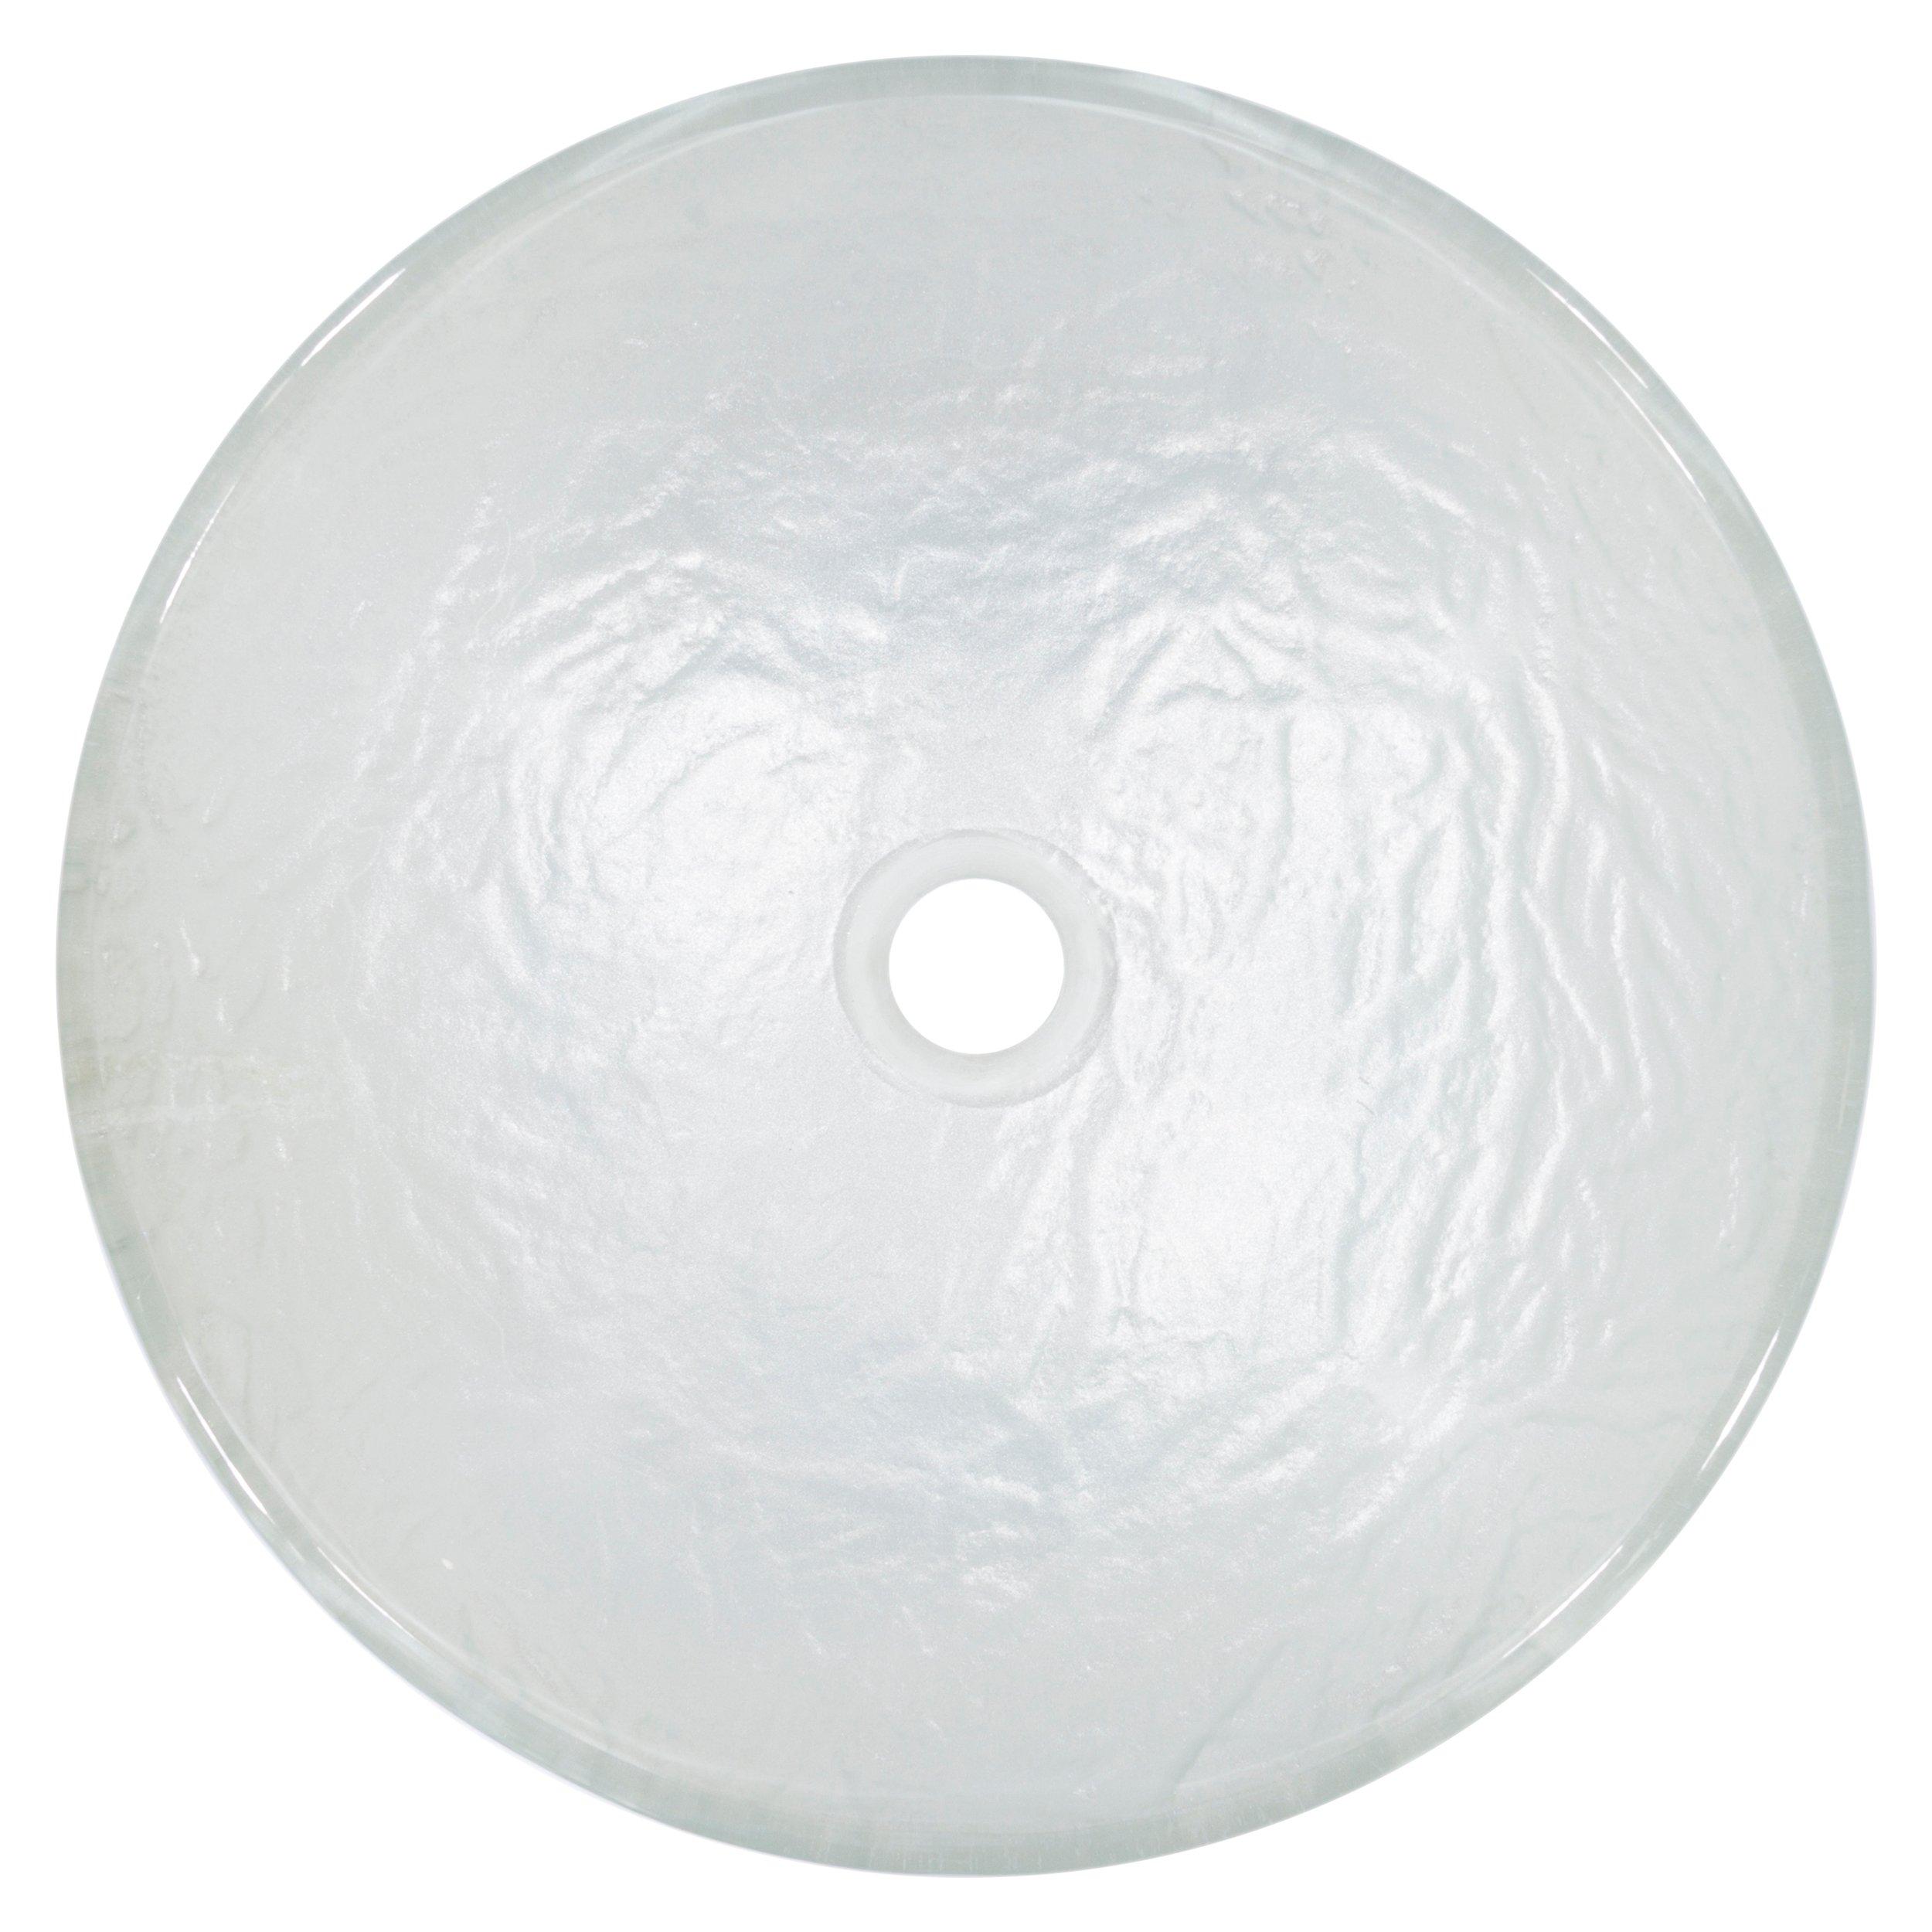 Carrara White Polished Marble Sink - 17 x 17 - 937500606 | Floor and Decor